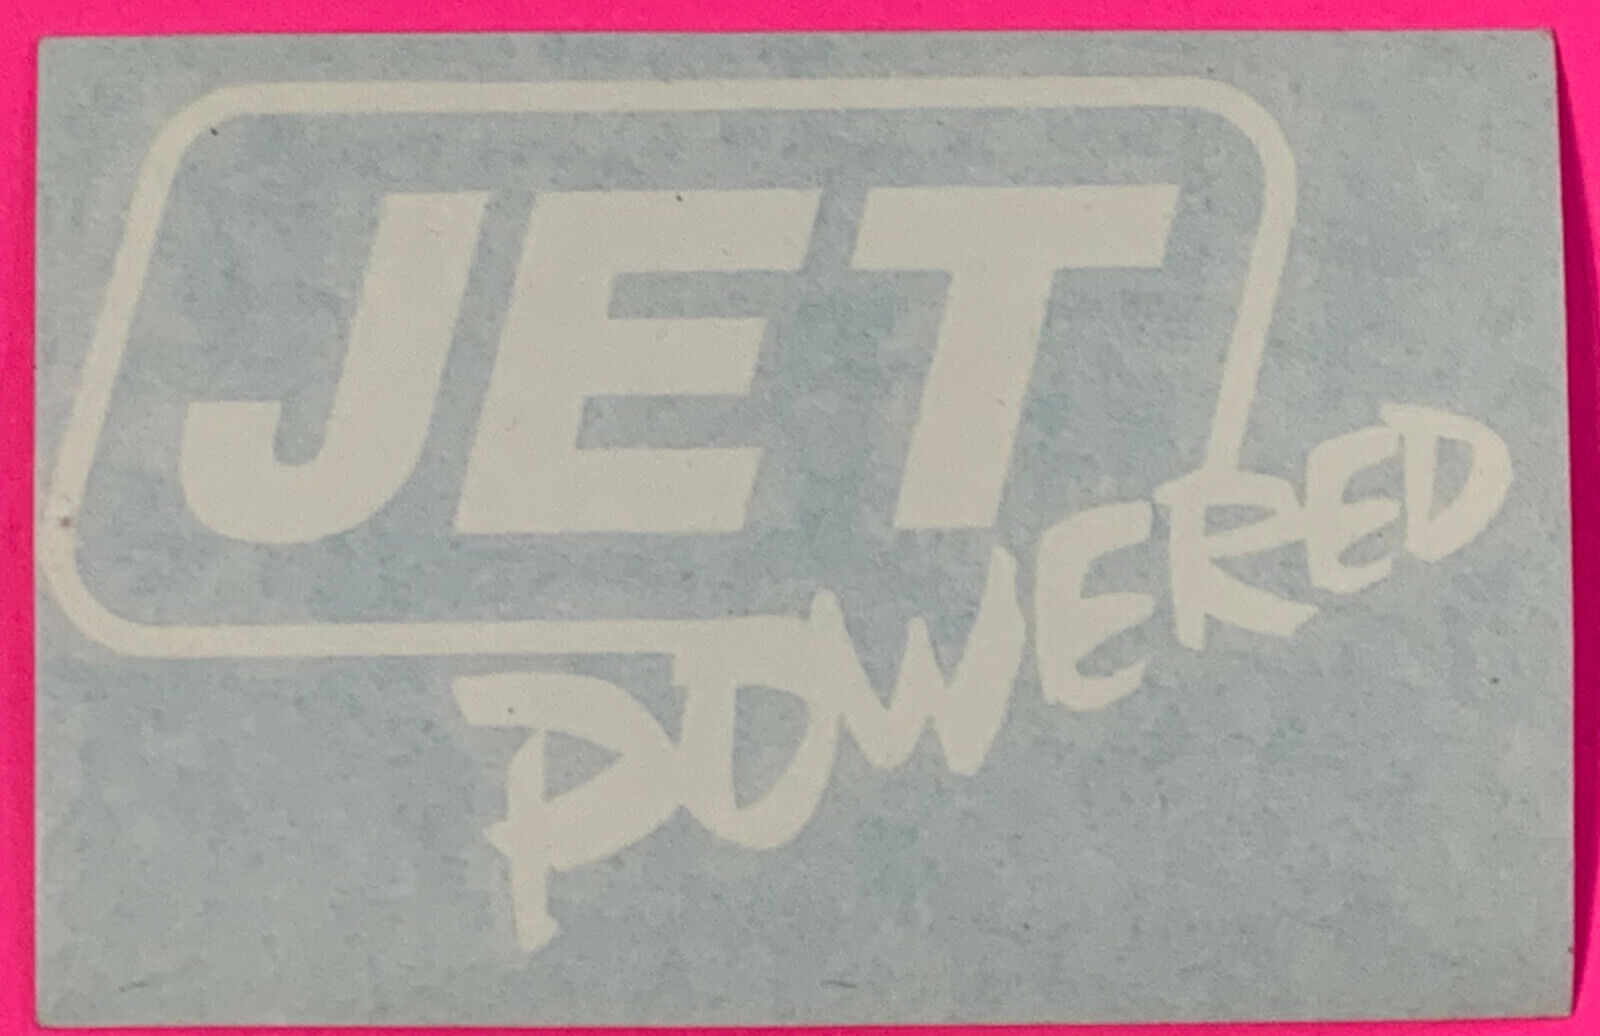 JET POWERED PERFORMANCE CHIPS VINTAGE DECAL STICKER. Peel and Stick